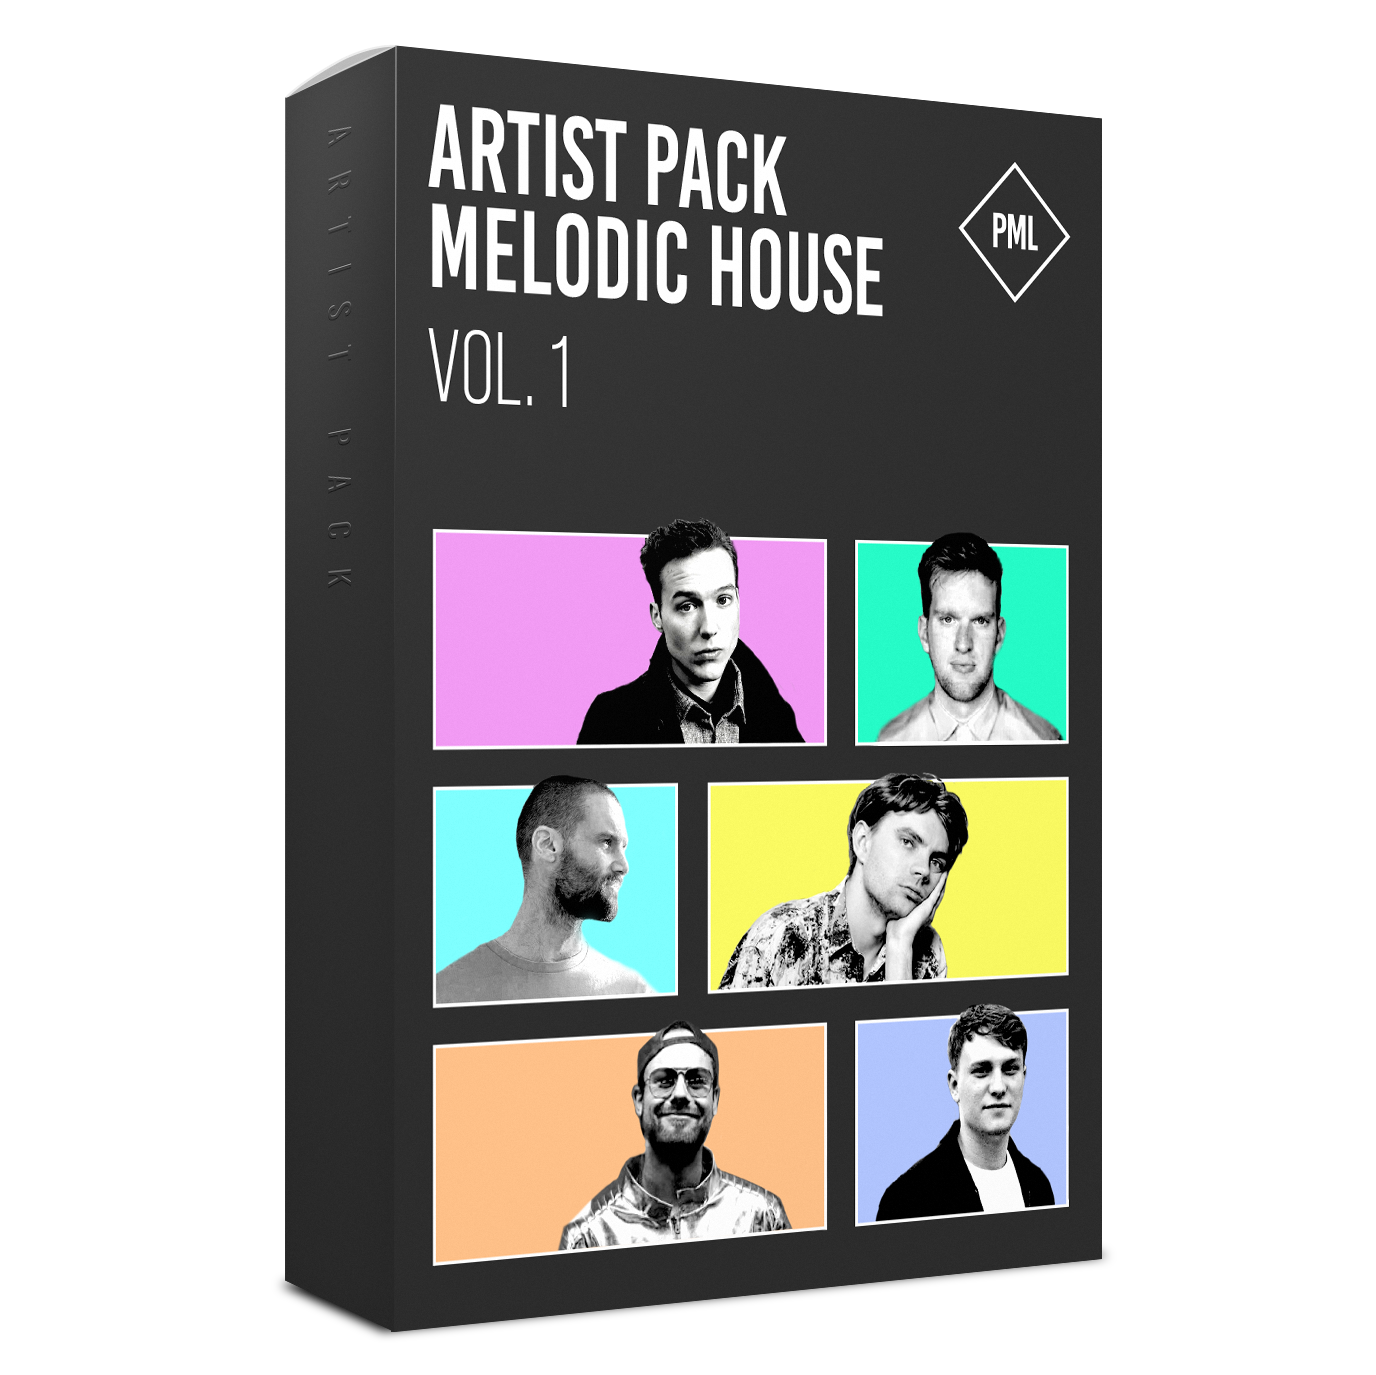 Artist Pack Vol. 1 - Melodic House